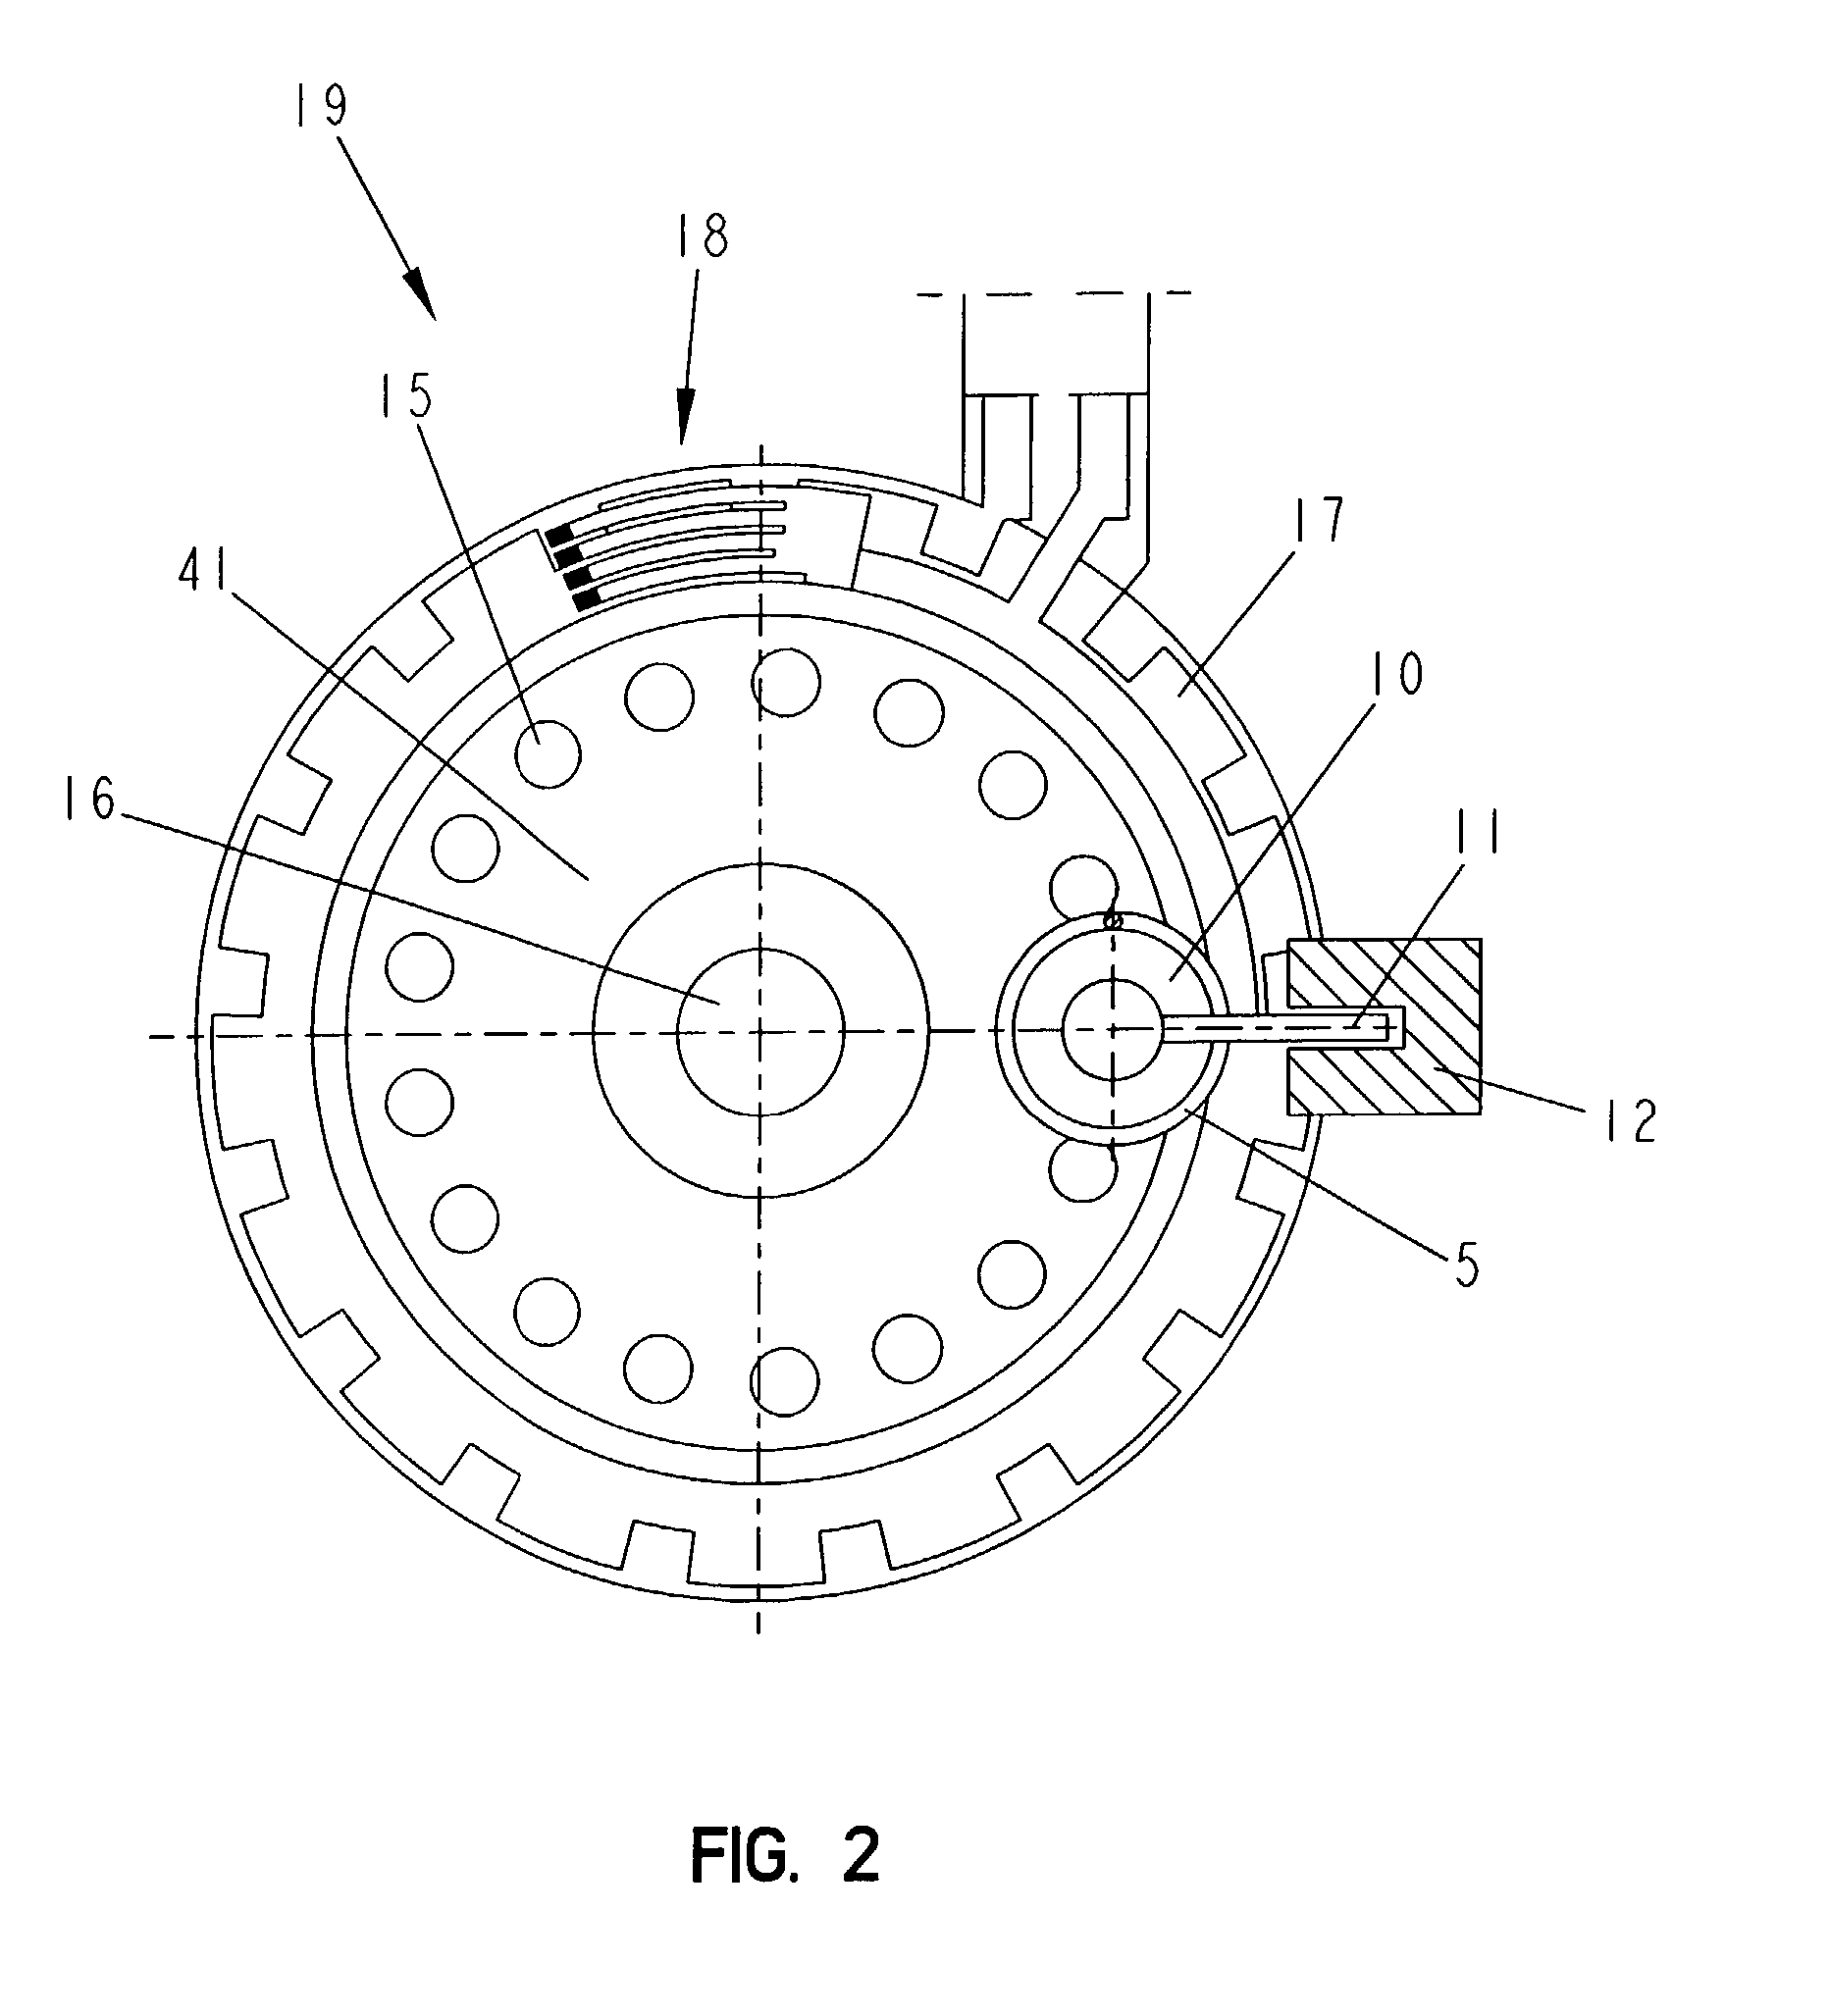 Device for removing consumable analytic products from a storage container